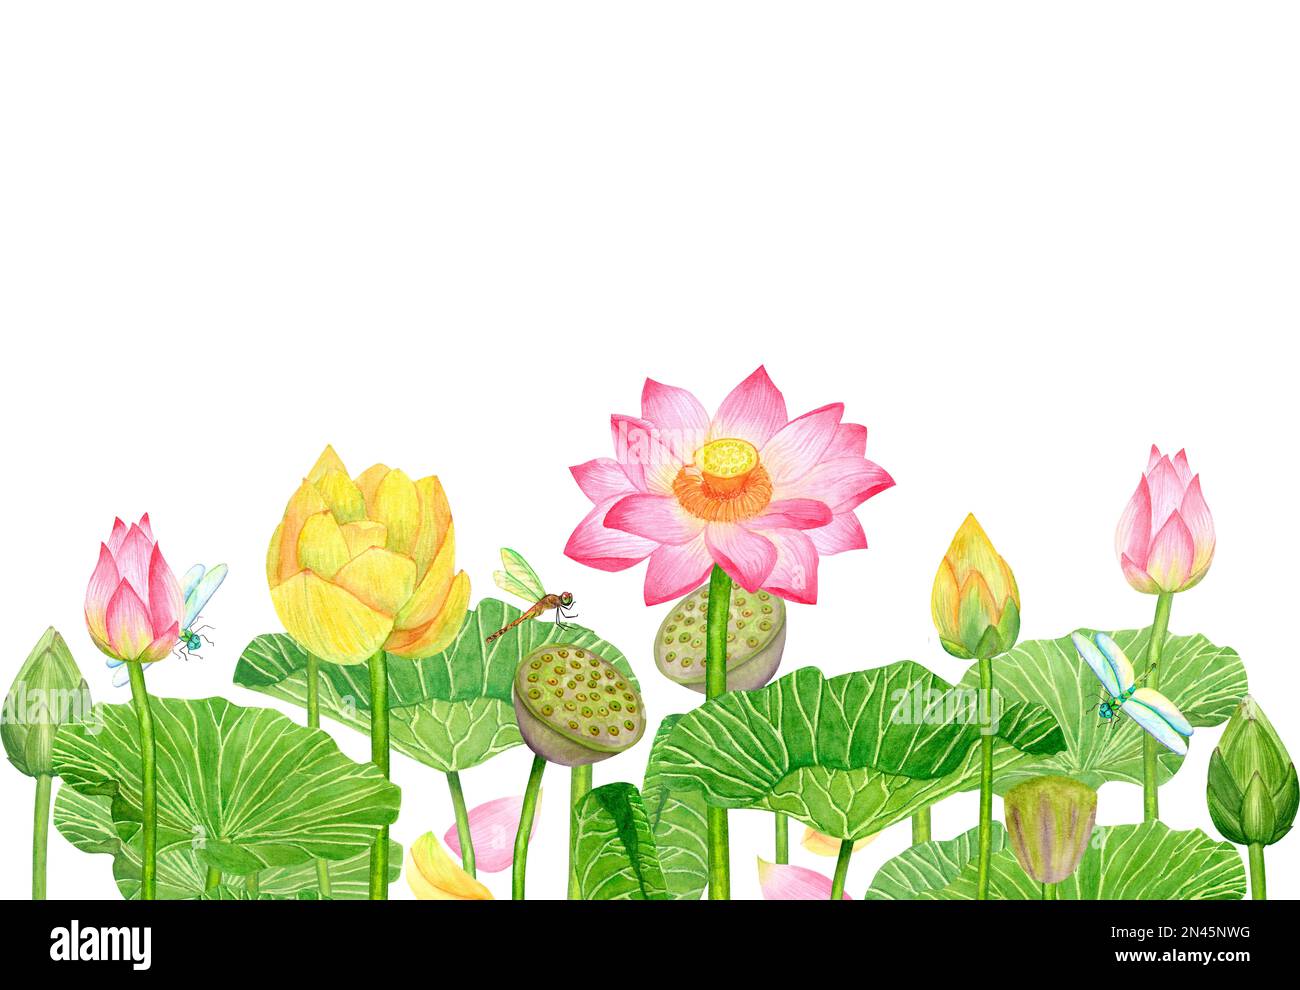 Banner with pink yellow buds lotus flowers and green leaves. Flying dragonflies. Hand-drawn watercolor illustration isolated on white background. Stock Photo